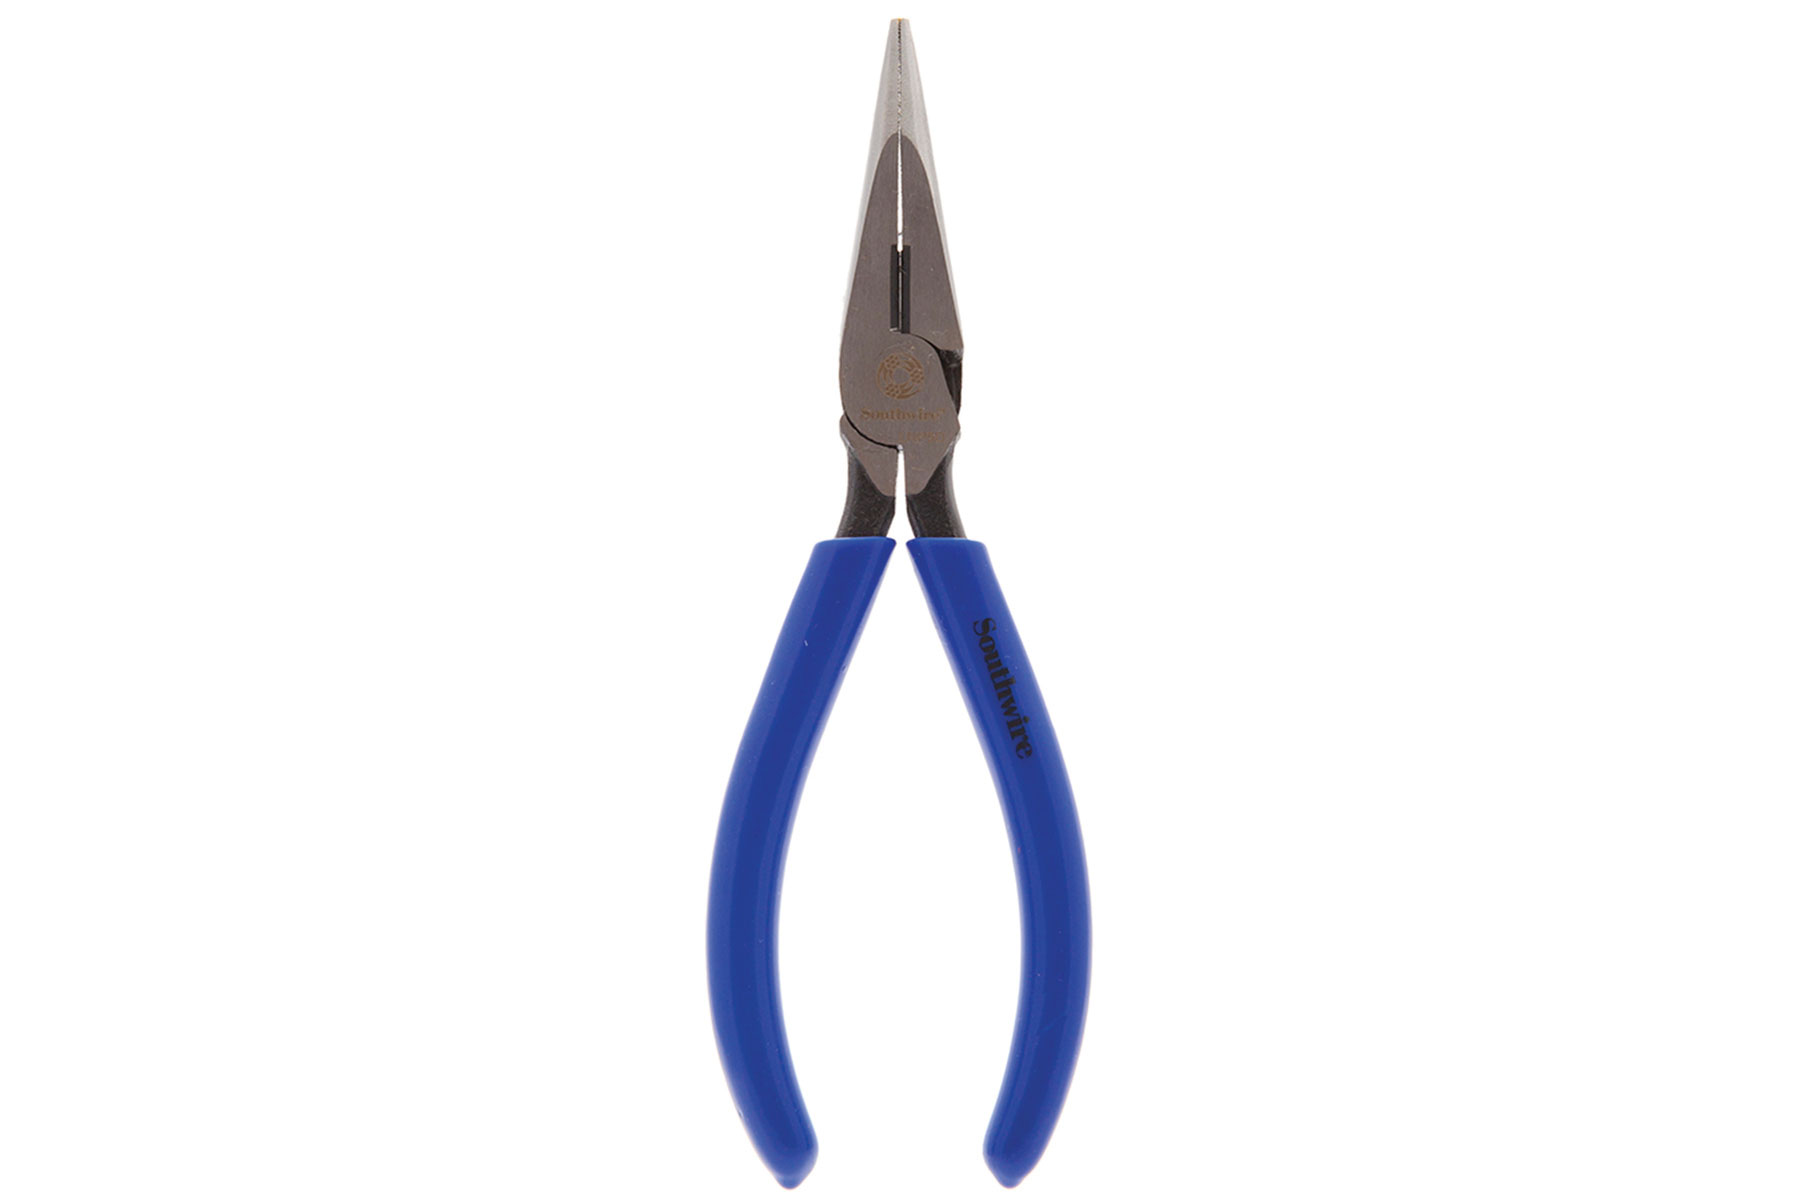 Pliers with blue handles. Image by Southwire.